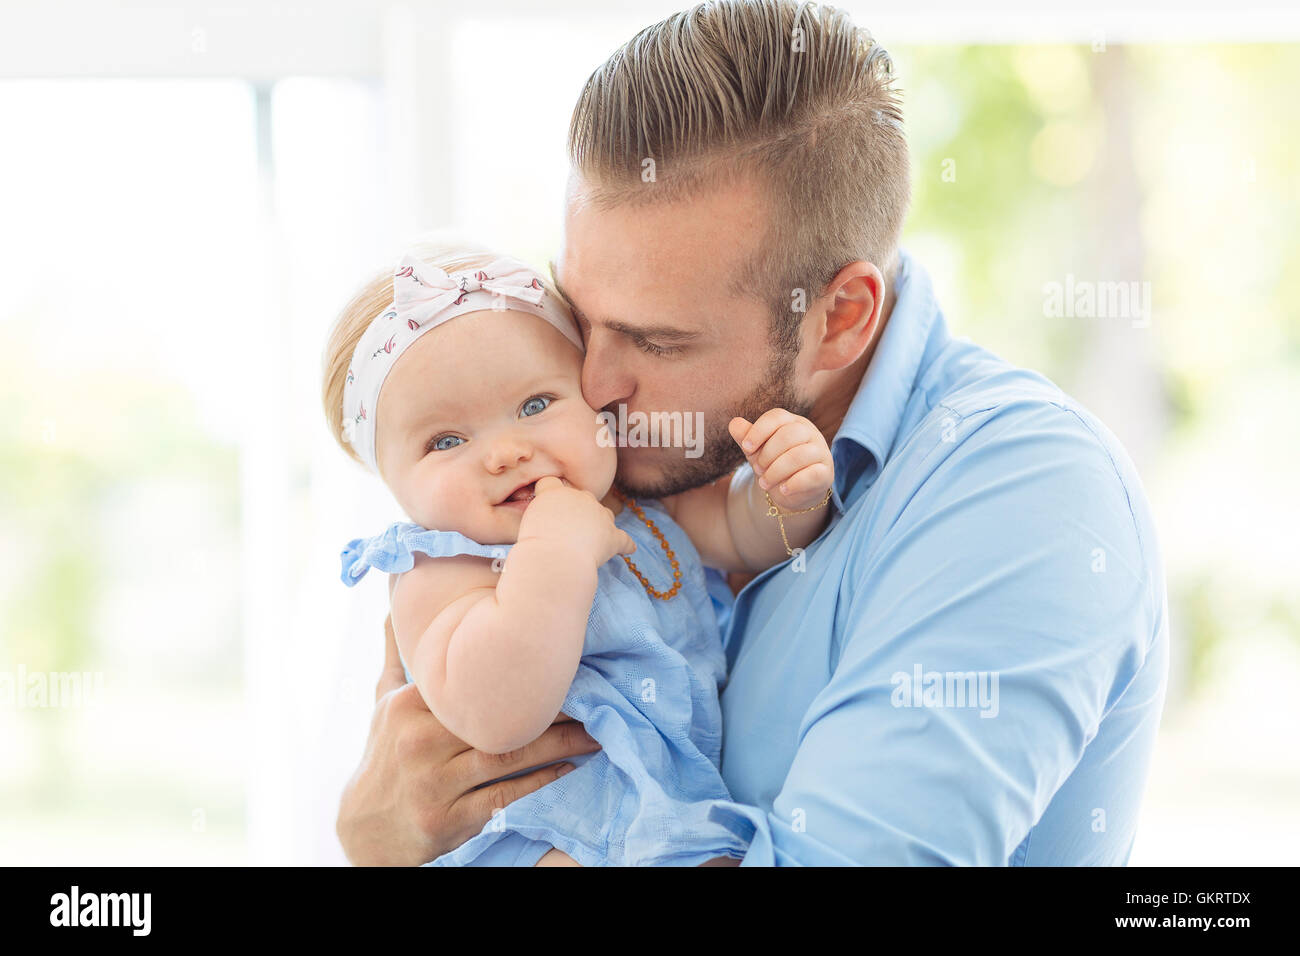 Dad playing and embracing his baby girl Stock Photo